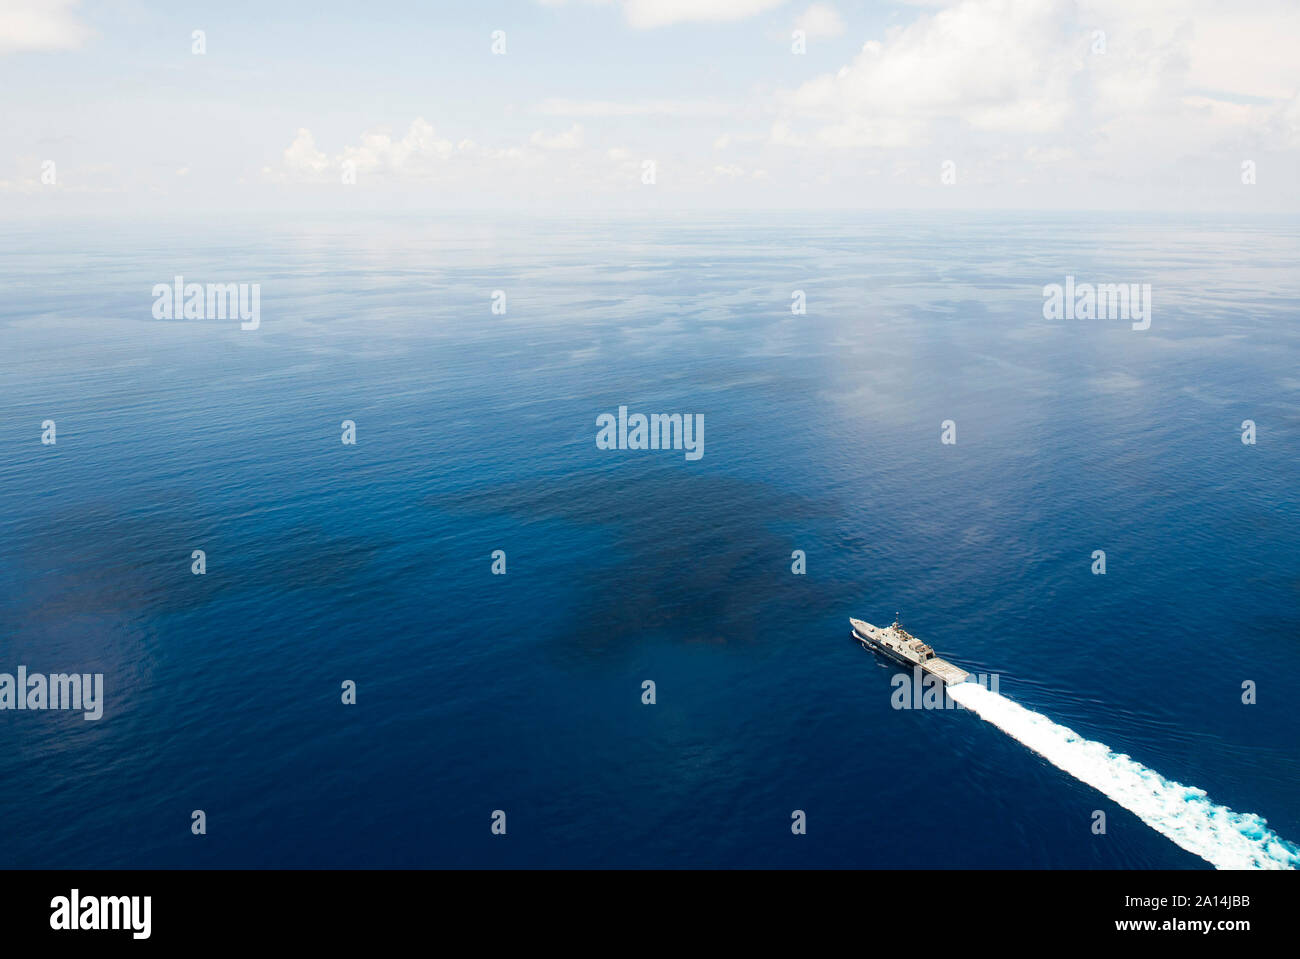 USS Fort Worth conducts patrols in the South China Sea near the Spratly Islands. Stock Photo